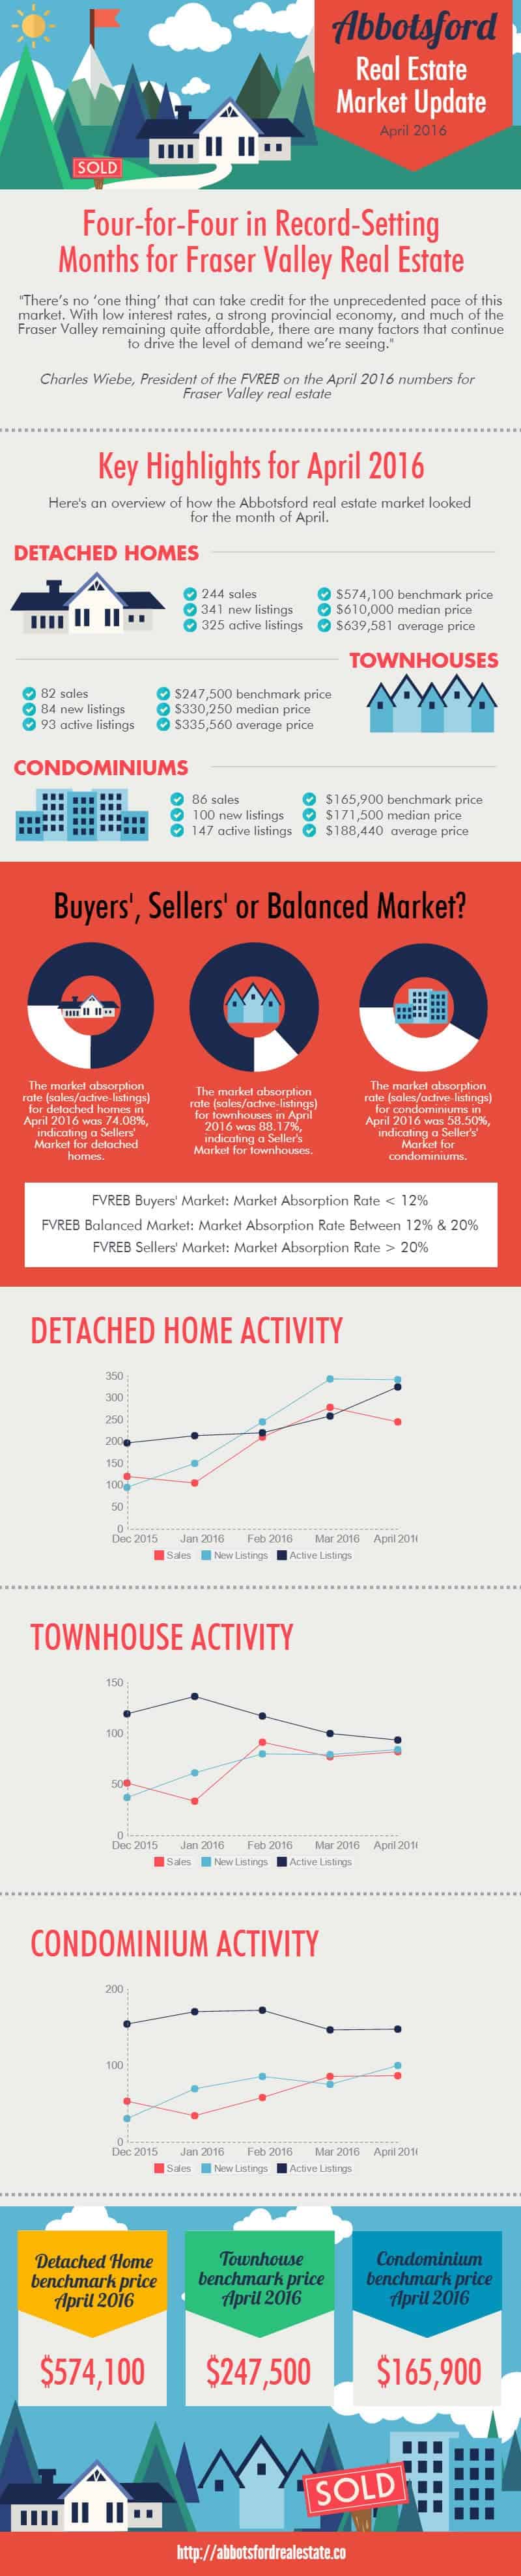 Abbotsford Townhouse Market Update April 2016 Infographic